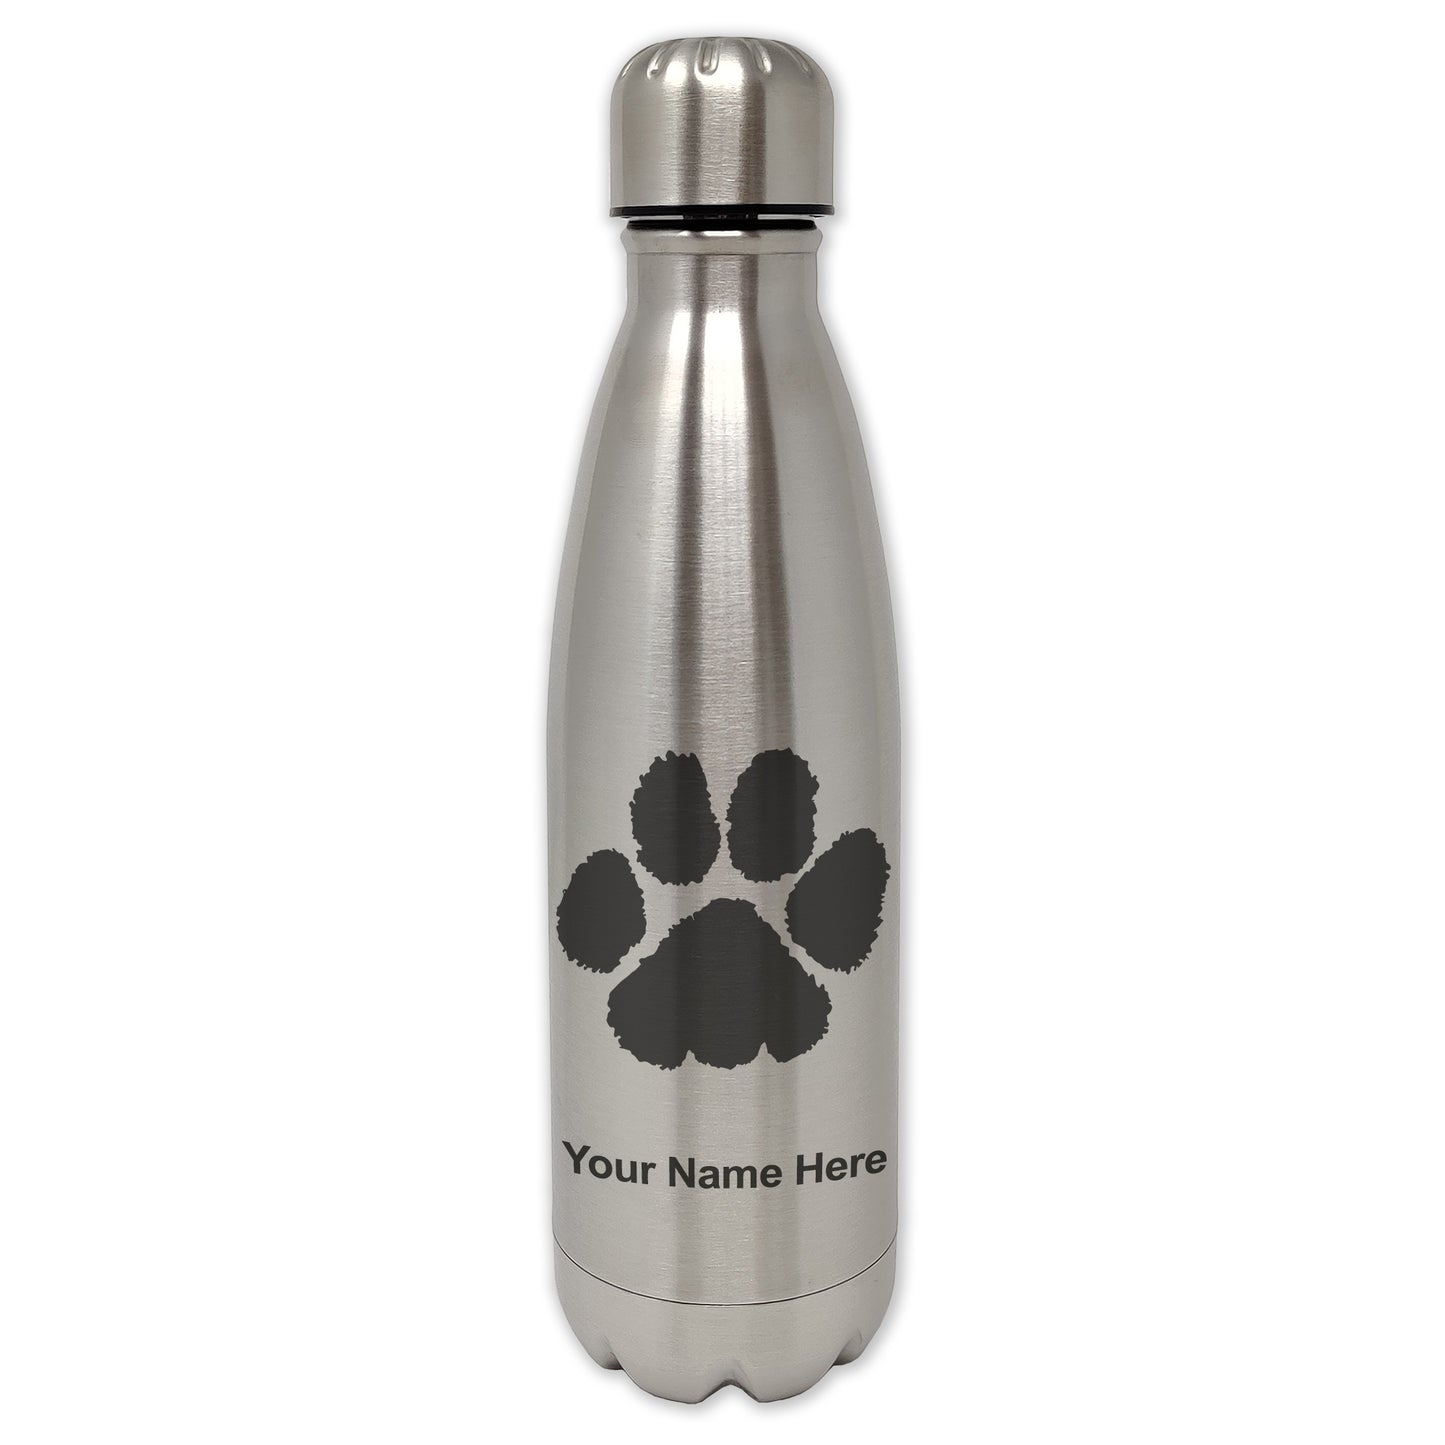 LaserGram Double Wall Water Bottle, Paw Print, Personalized Engraving Included